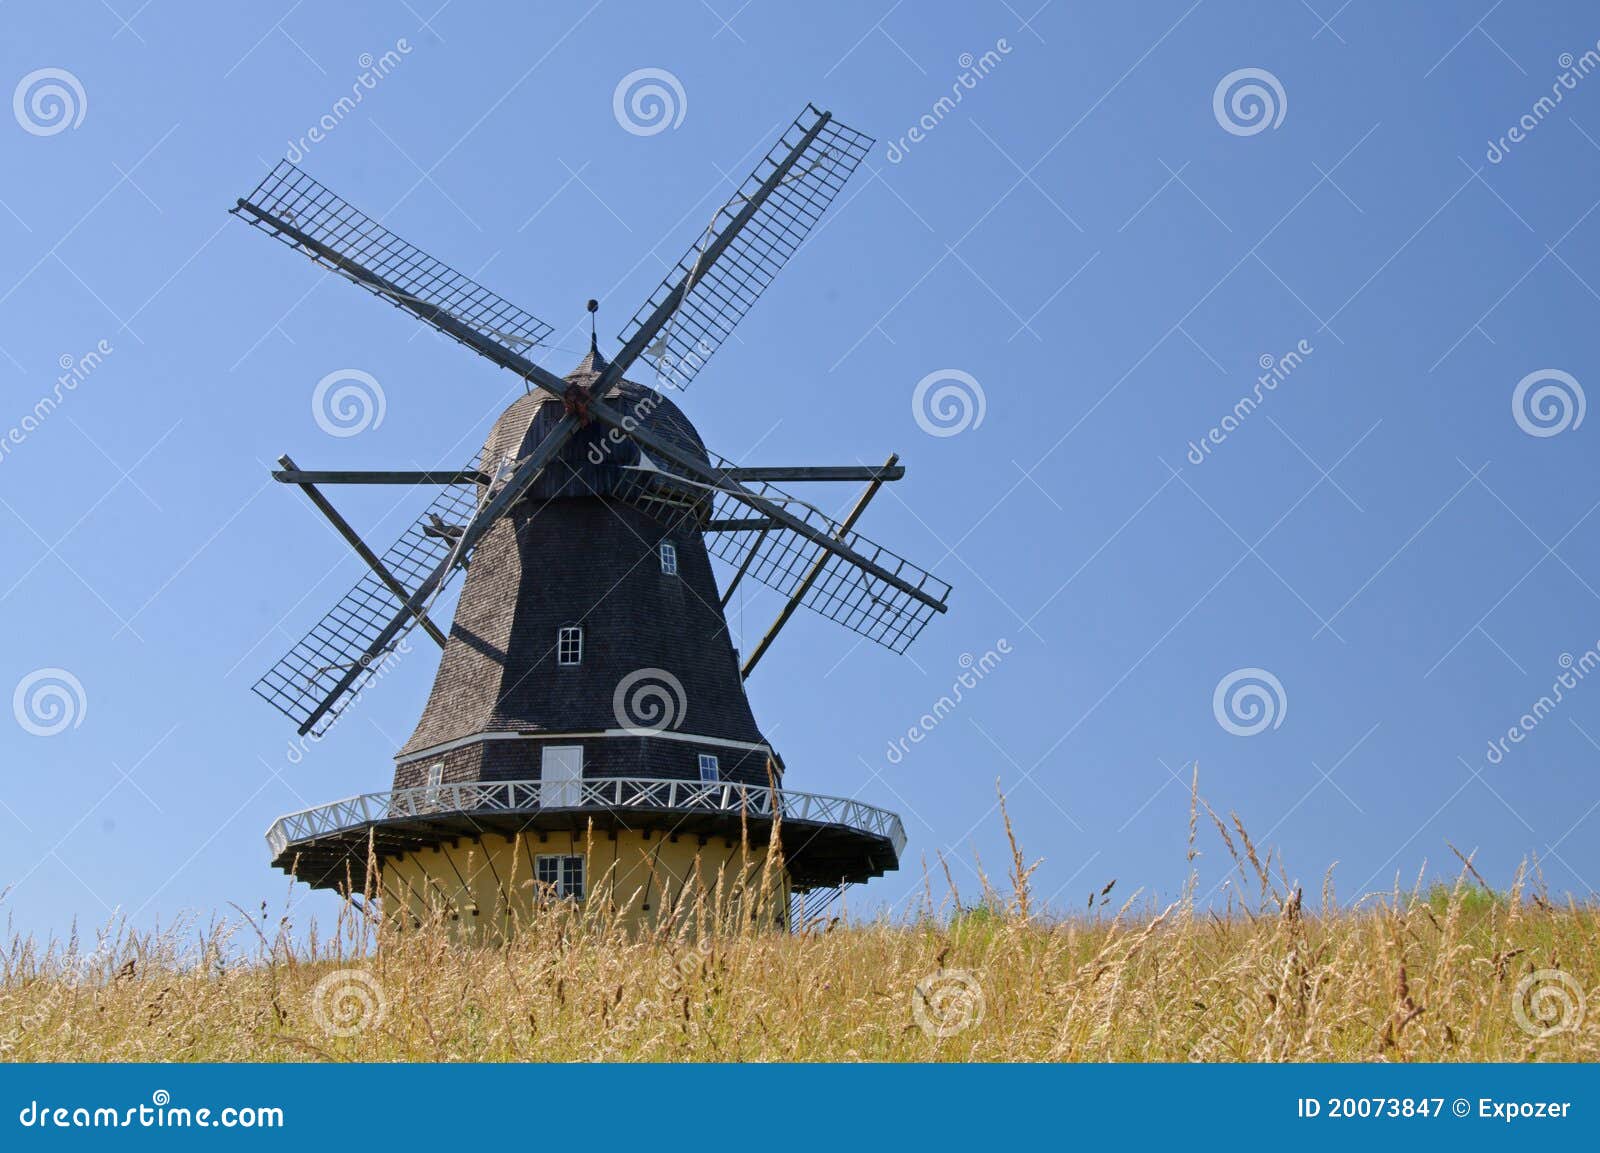 Dutch windmill placed in Denmark. Mill was build in 1852.